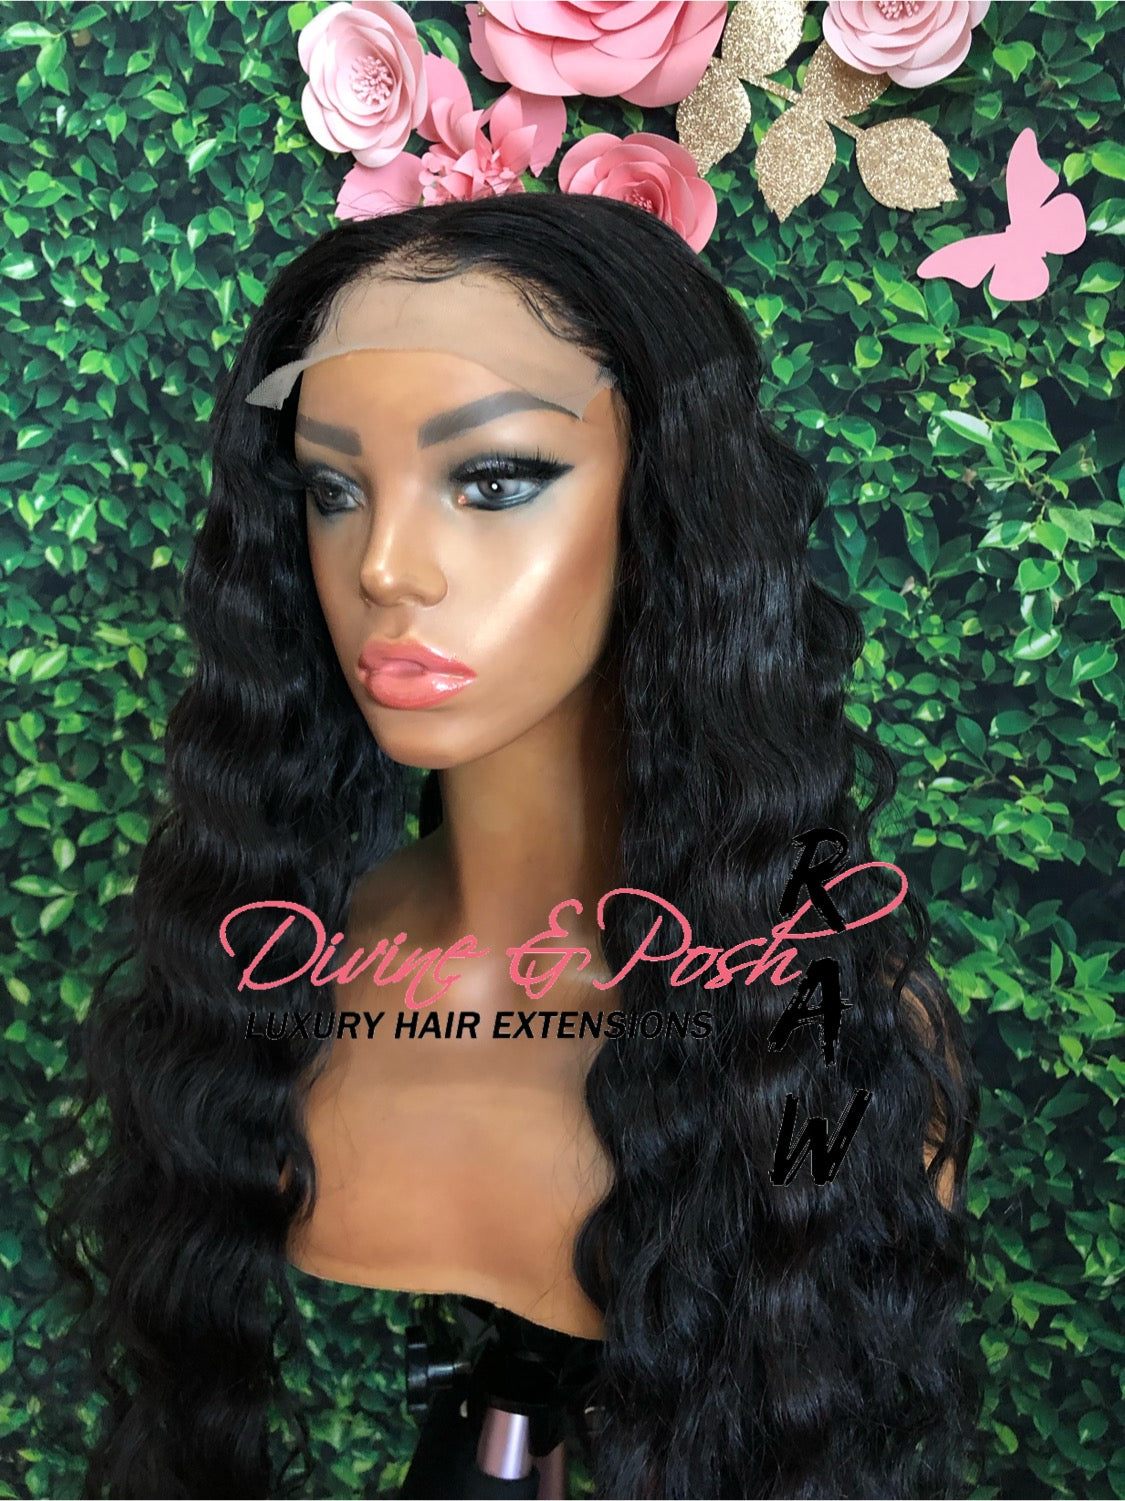 Wavy Hair Lace Wigs – Divine and posh